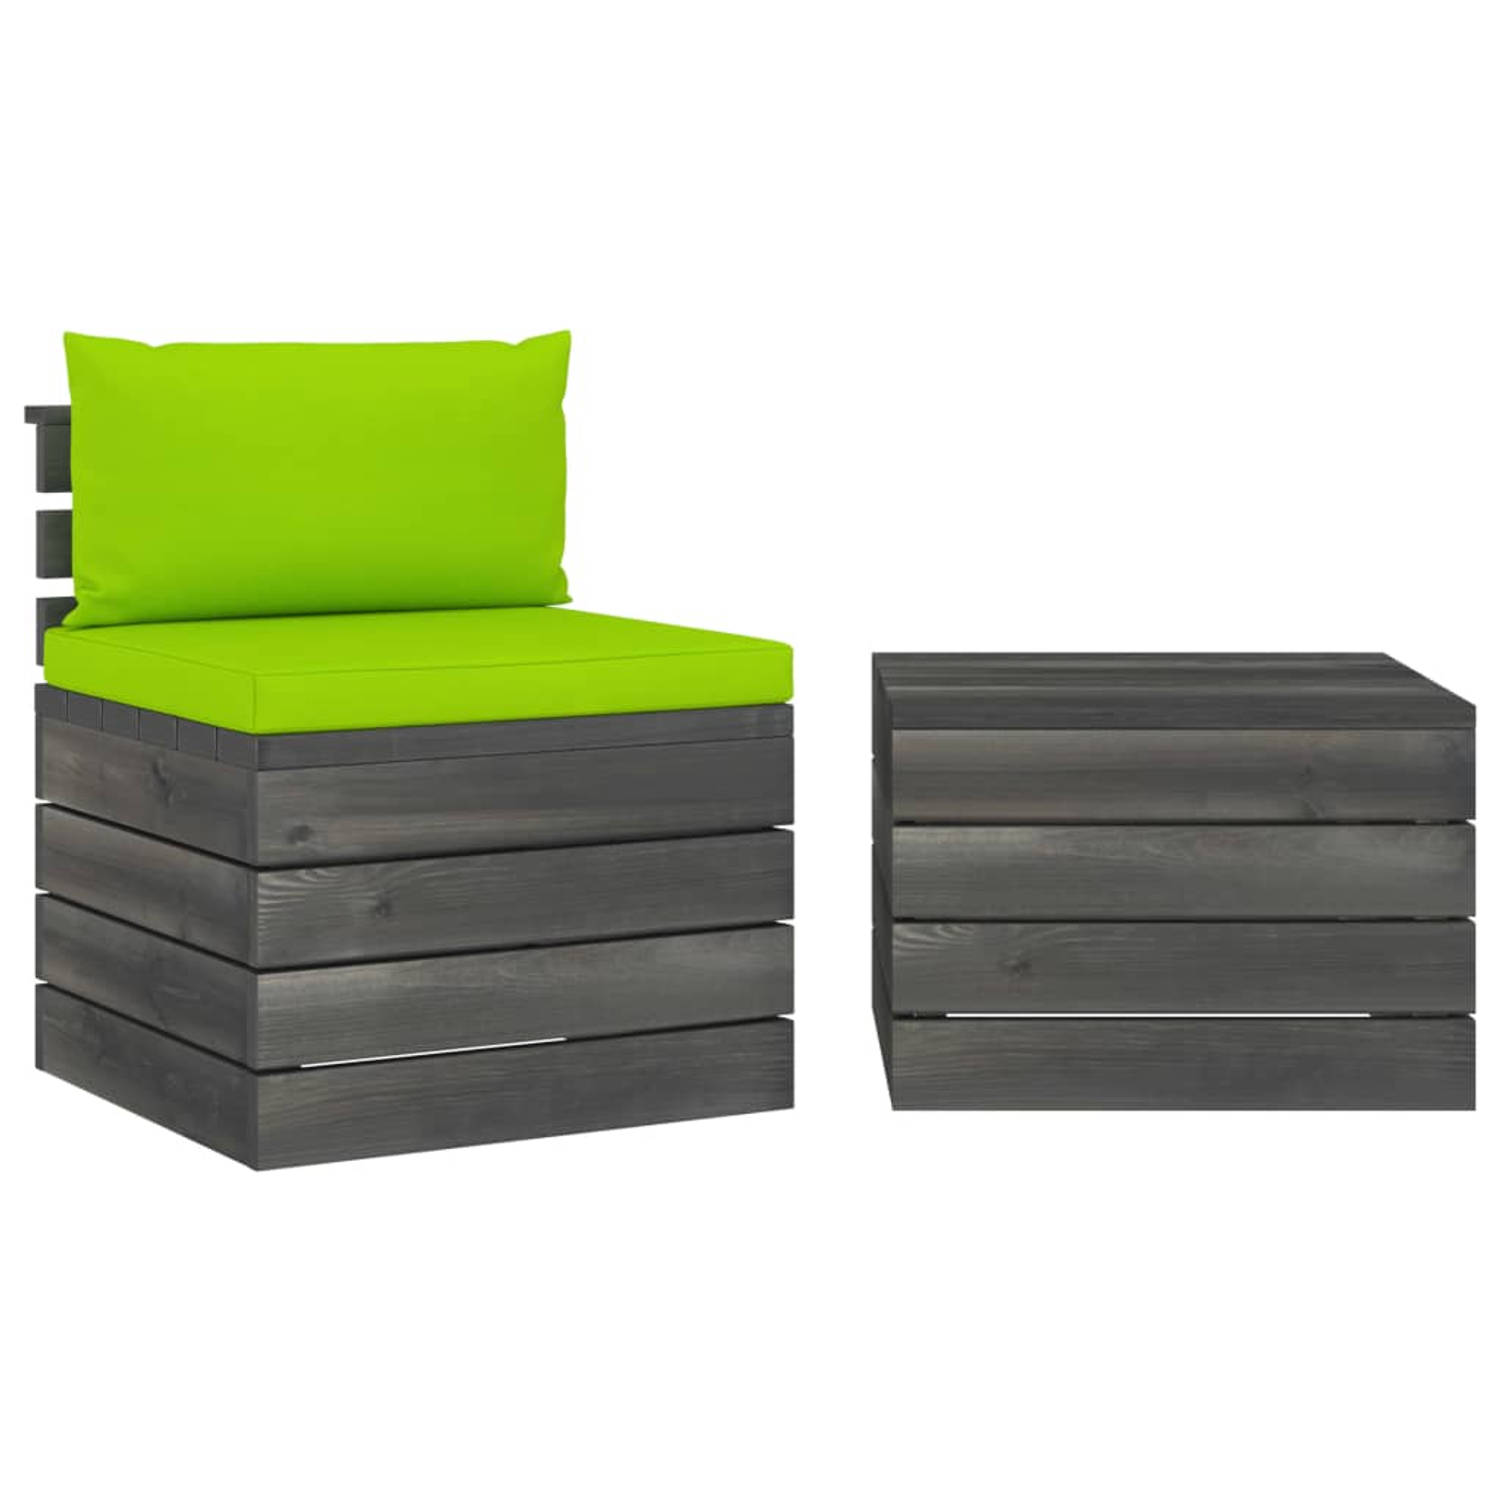 The Living Store Pallet Loungeset - Massief Grenenhout - Helder groen - 60x65x71.5 cm - 60x60x41.5 cm - 60x60x6 cm - 60x38x13 cm